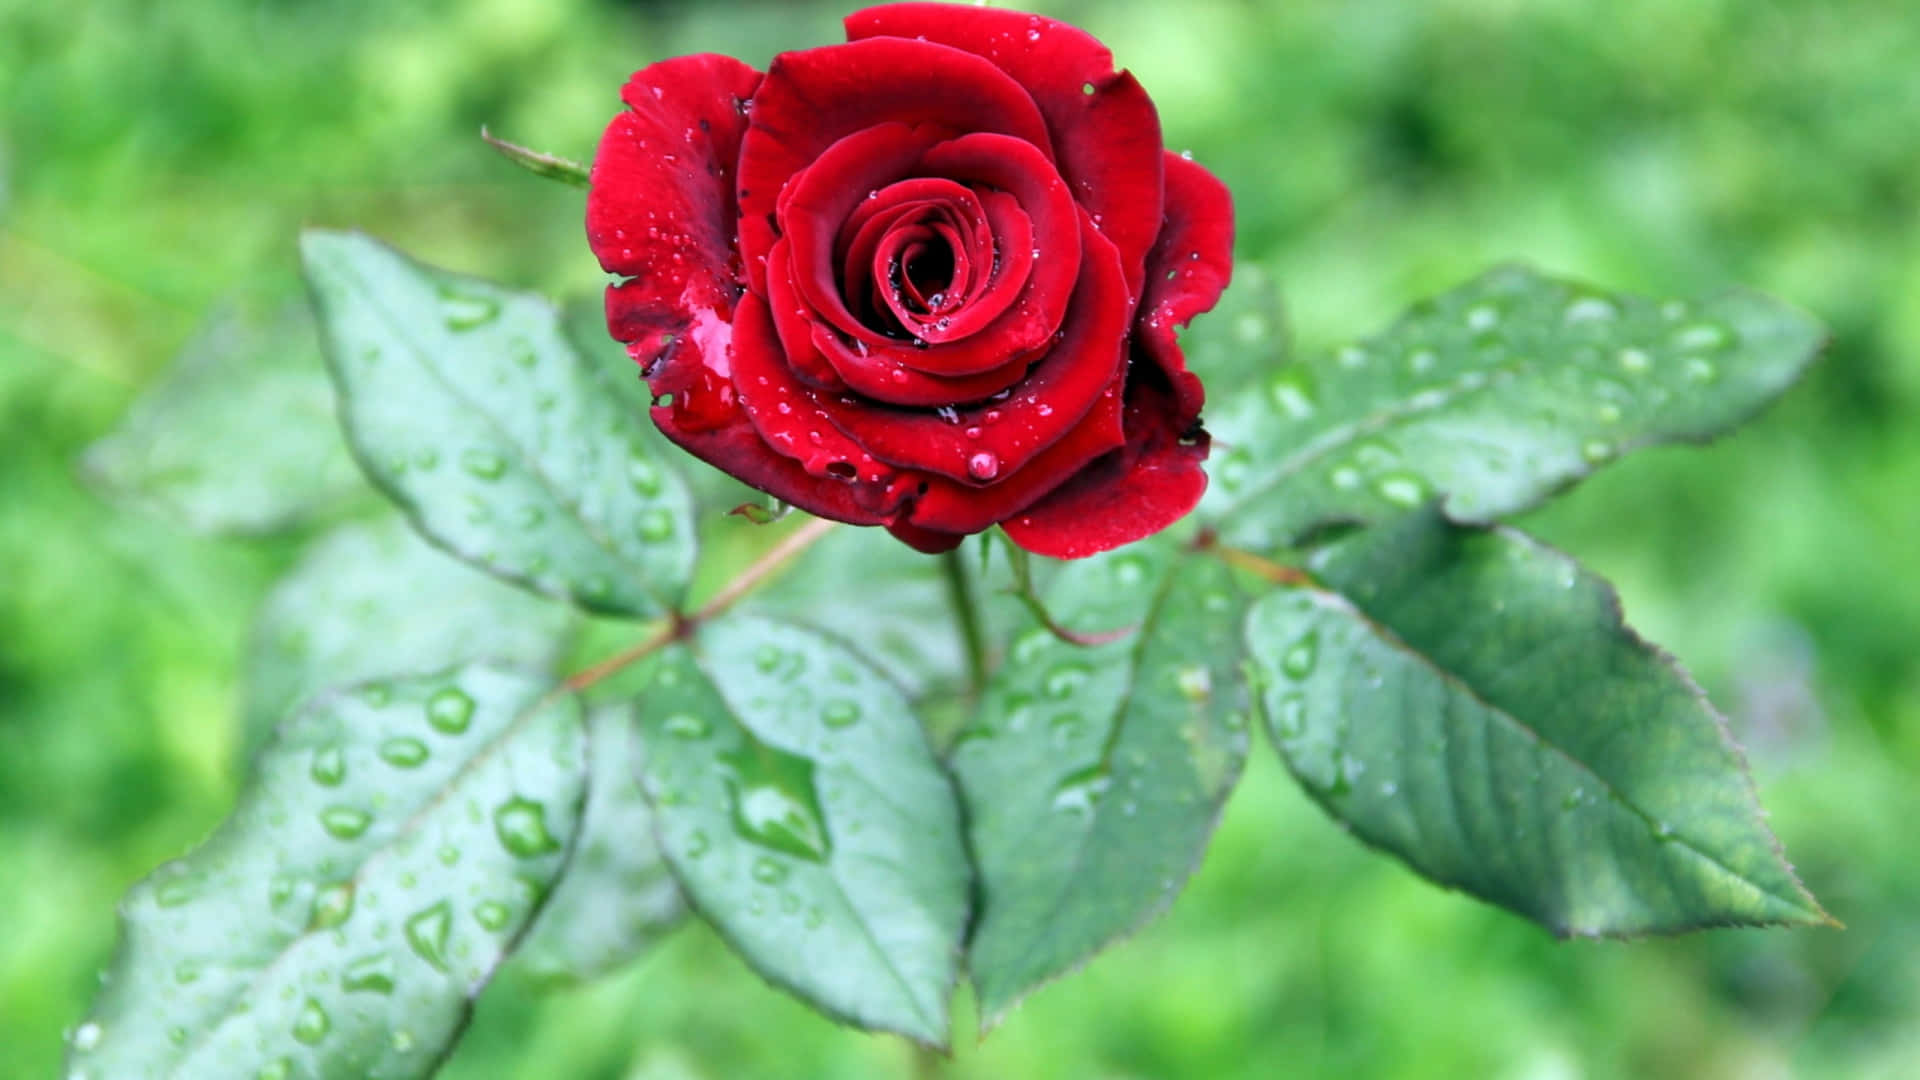 A Red Rose With Water Droplets On It Background